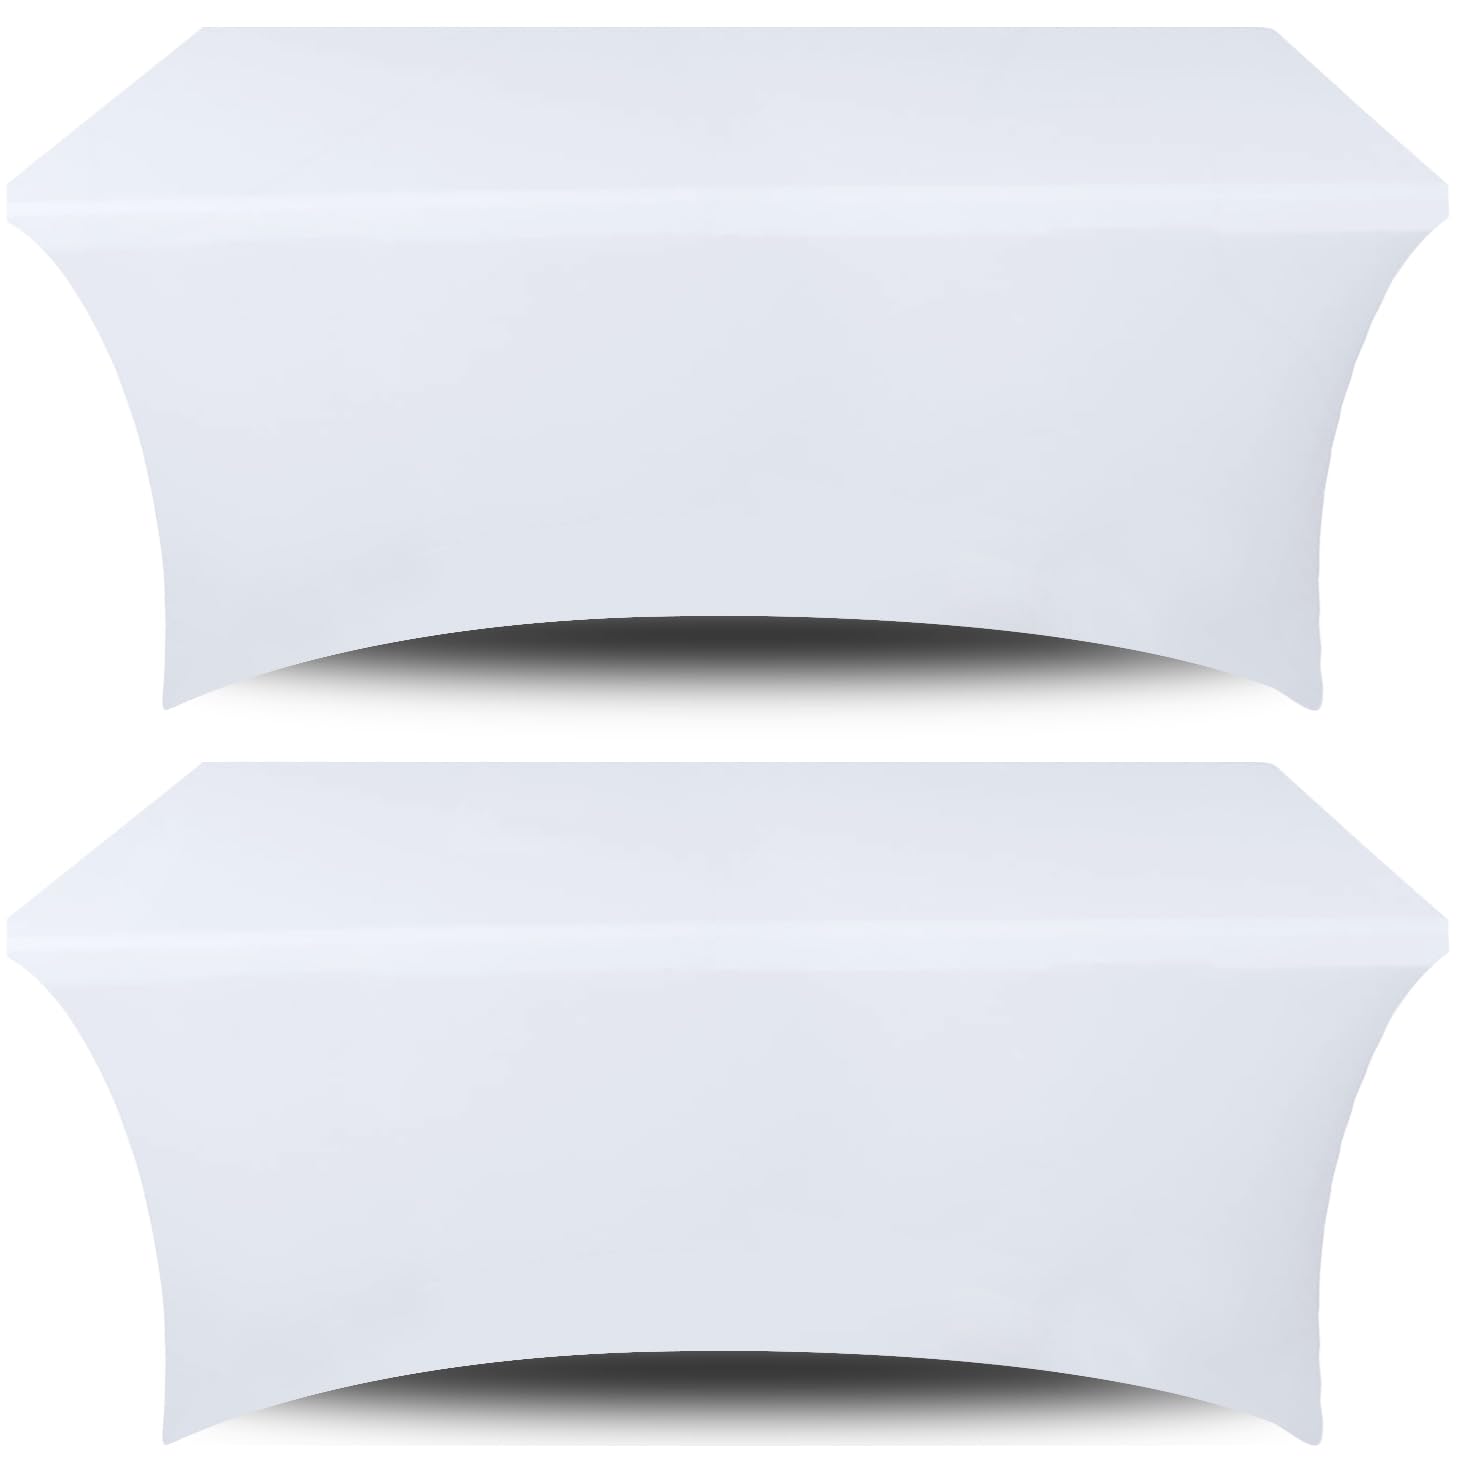 Stretch Spandex Table Covers 6FT, Pack of 2 Fitted Tablecloths for Rectangle Tables, Stretchy Wrinkle Resistant Folding Table Cover, White  - Acceptable